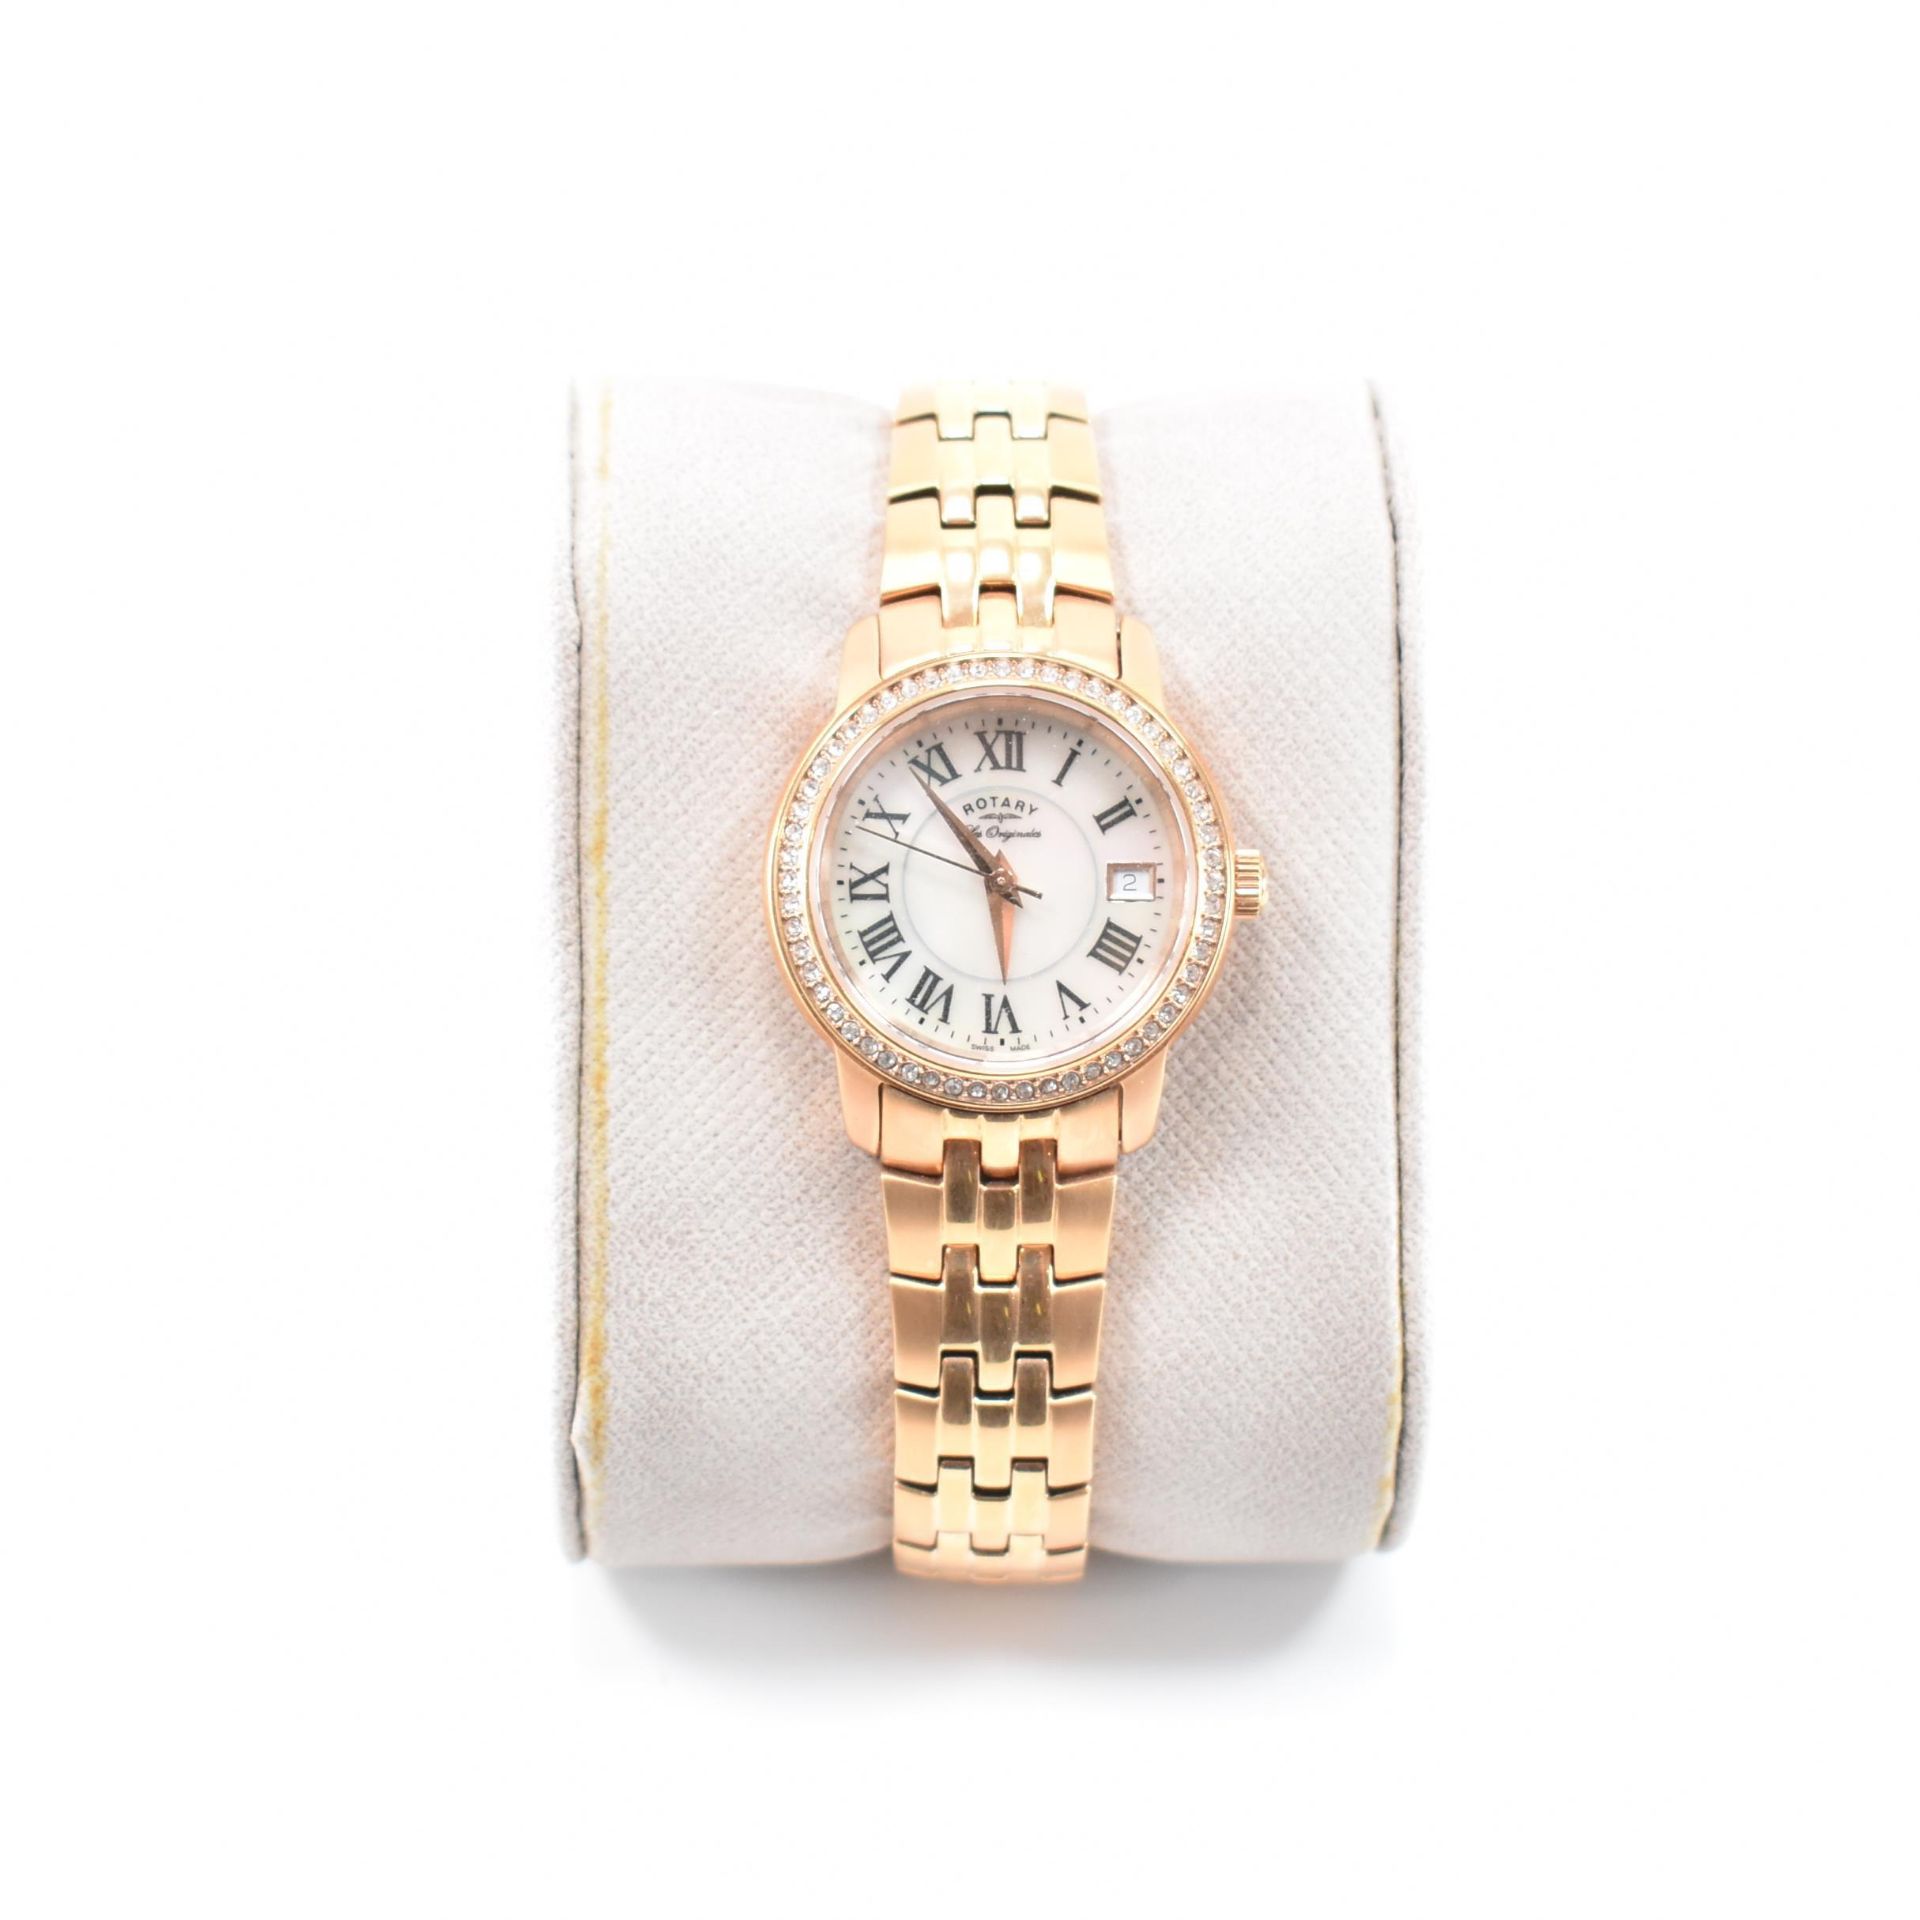 ROTARY WOMANS' WRIST WATCH - Image 2 of 4